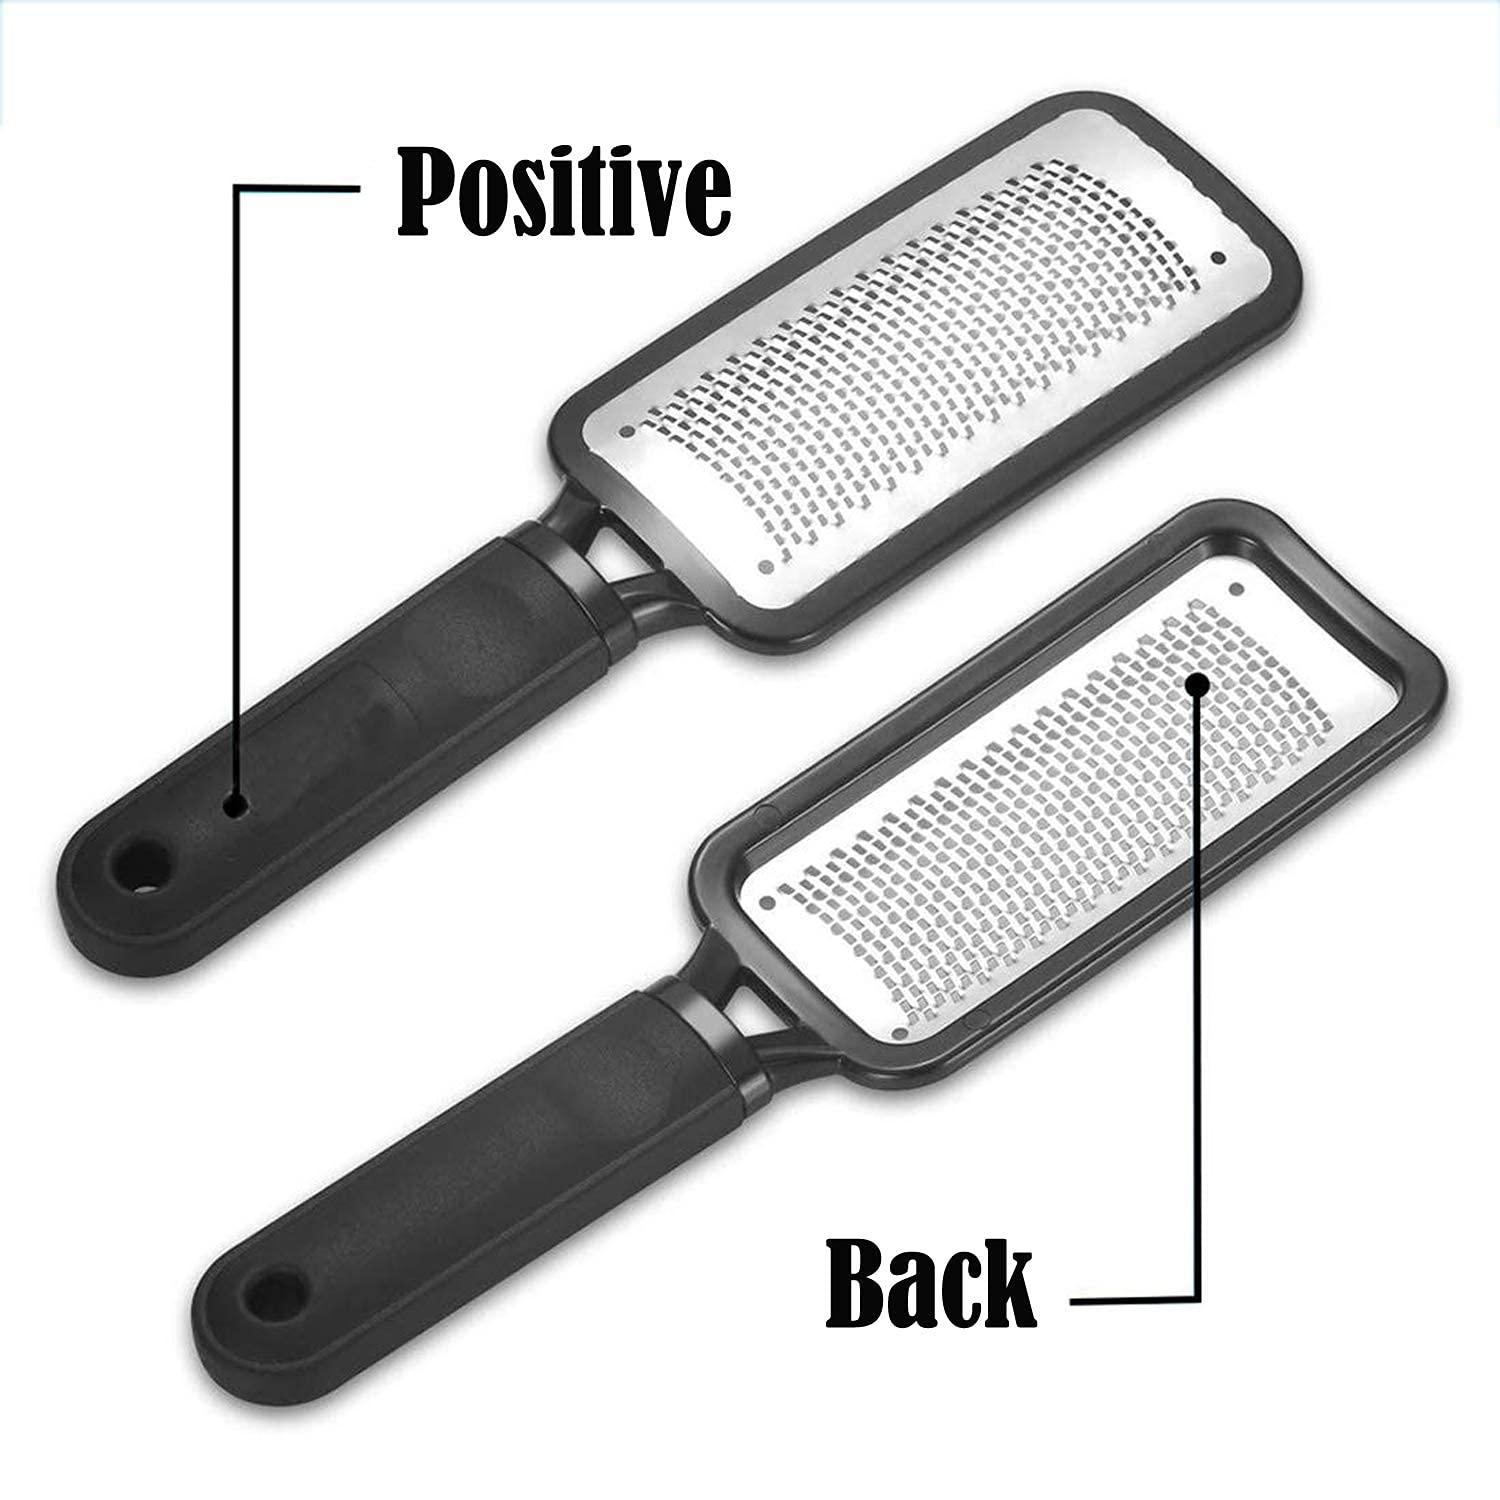 Foot Scrubber 2pcs, Callus Remover for Feet with Stainless Steel, Foot File  Set of 2, Pedicure Tools, Foot Scrub Supplies Black